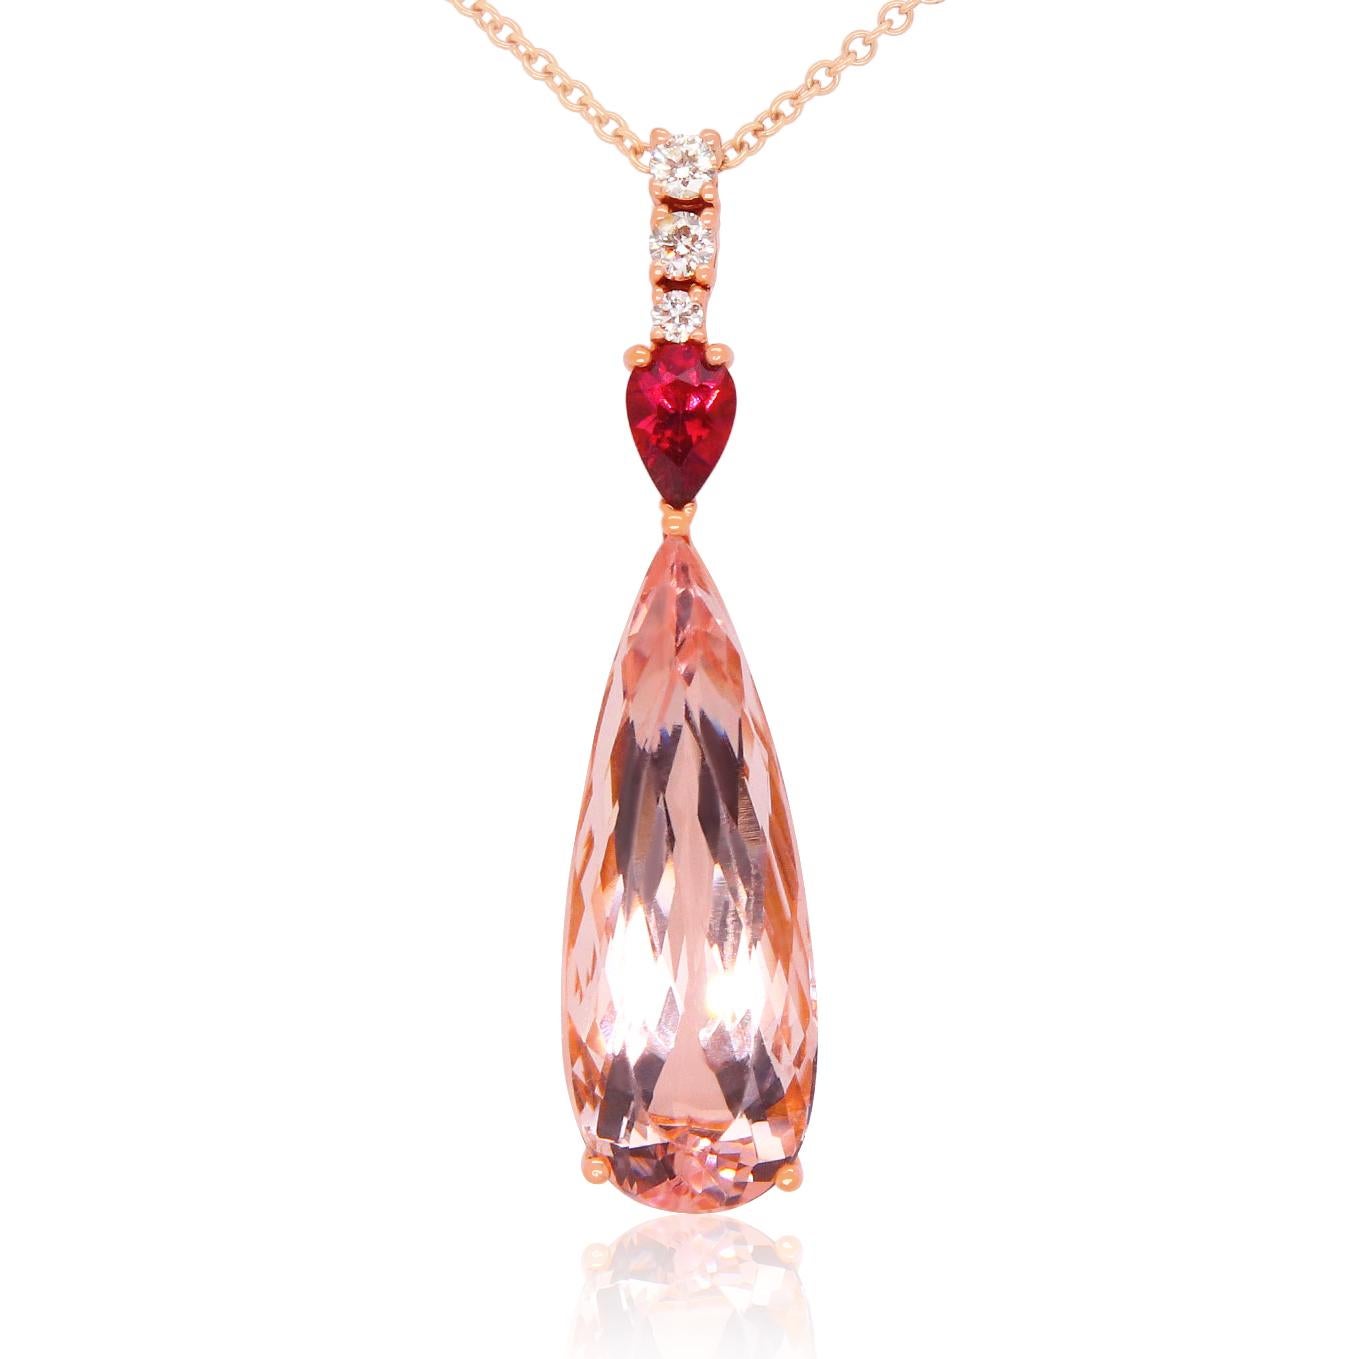 Material: 14k Rose Gold 
Center Stone Detail:  1 Pear Shaped Pink Morganite at 14.58 Carats - Measuring 30x 10 mm
Stone Details: 1 Pear Shaped Pink Tourmaline at 0.68 Carats
Diamond Details: 3 Round White Diamonds at 0.21 Carats - Clarity: SI /